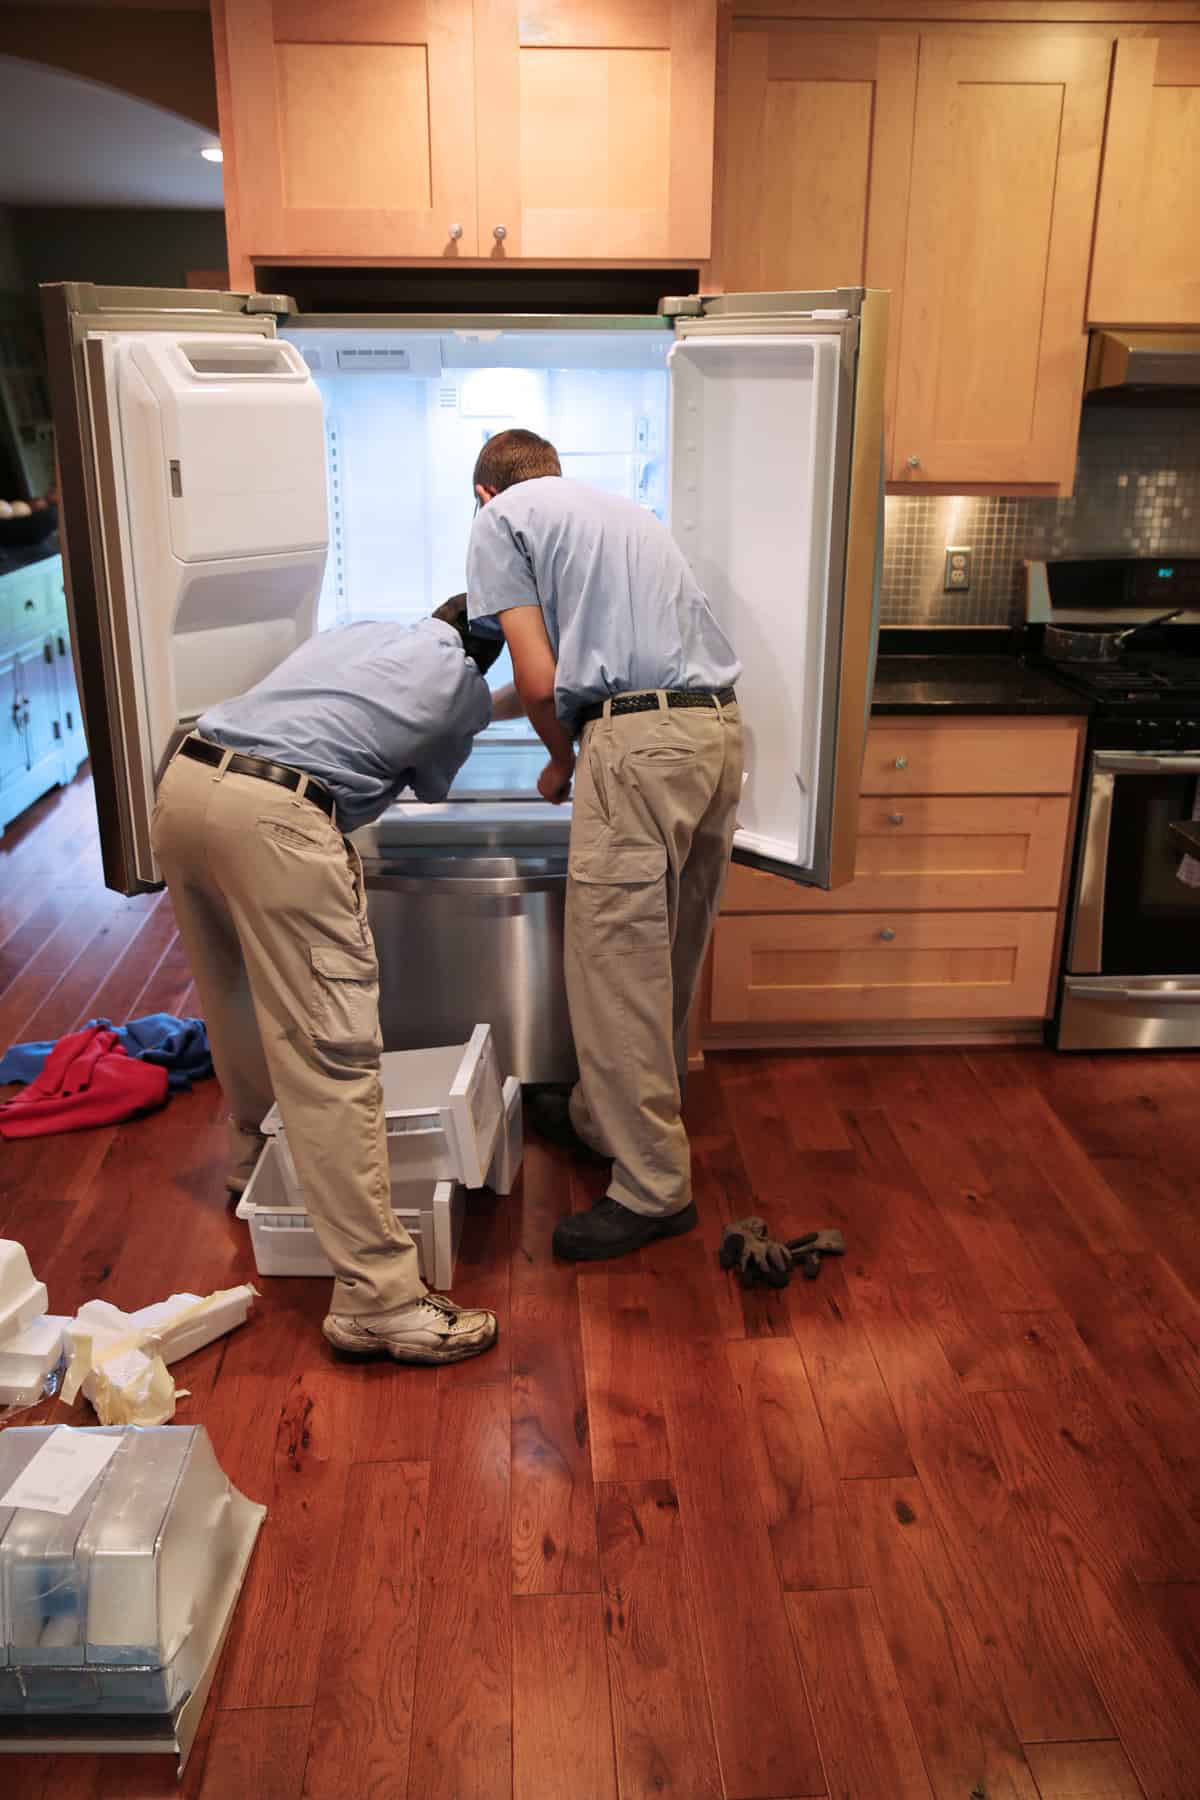 Installing new refrigerator in luxurious kitchen. Open and empty.